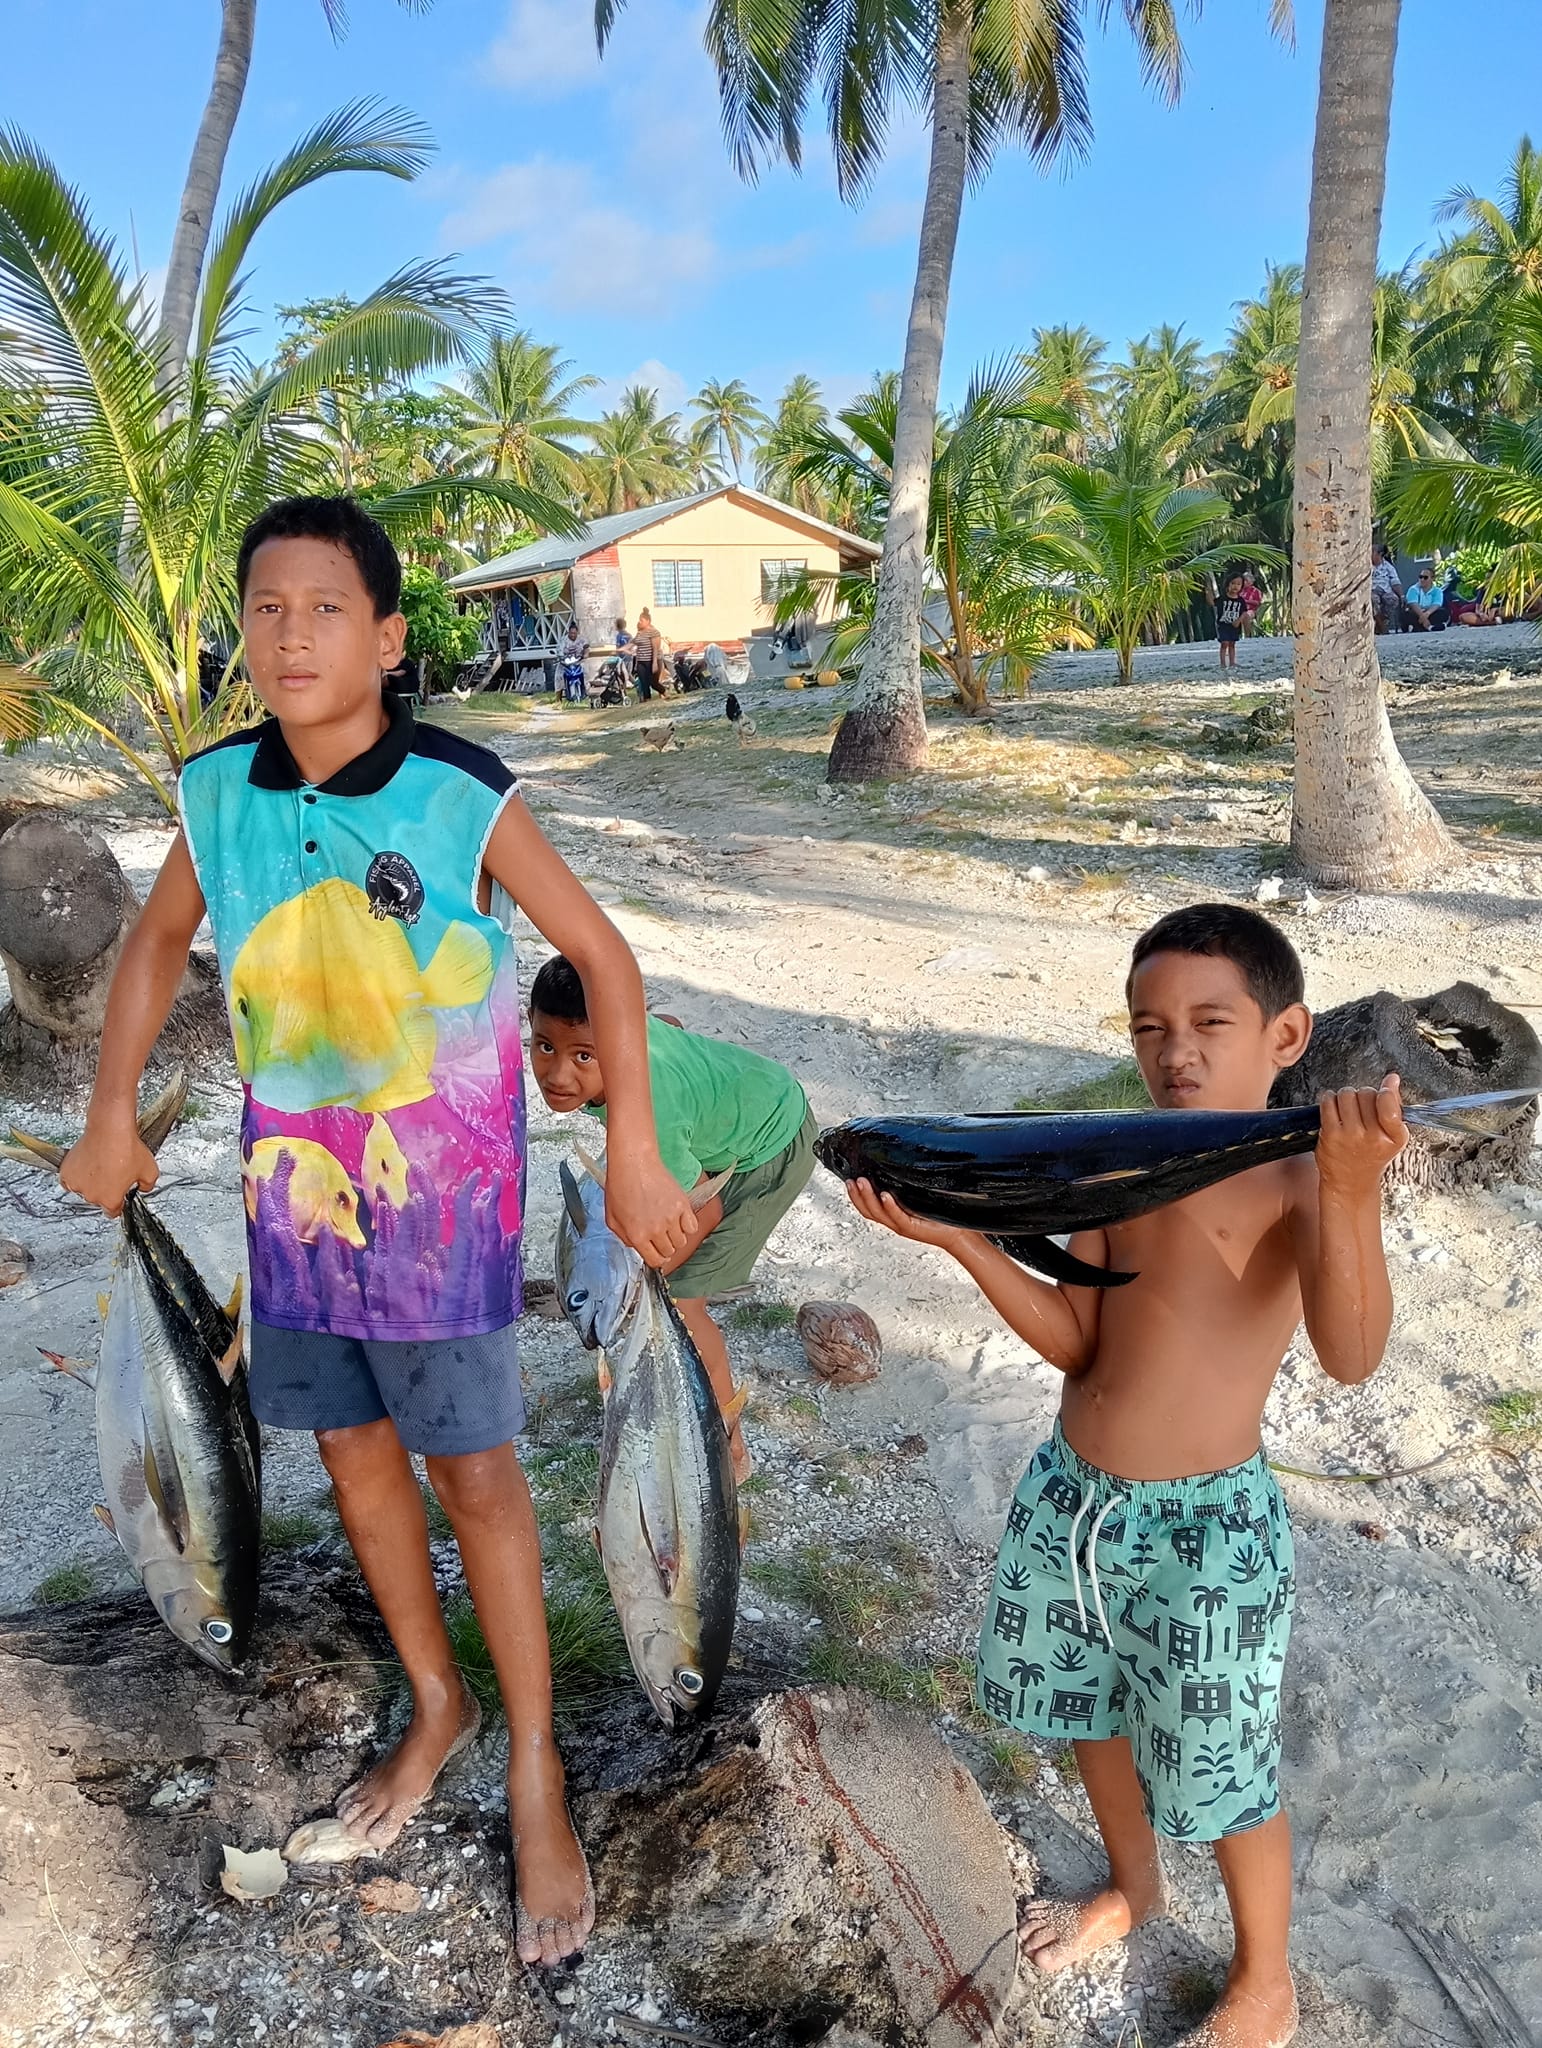 Fish, feast, and fun: Traditional event brings Pukapuka together